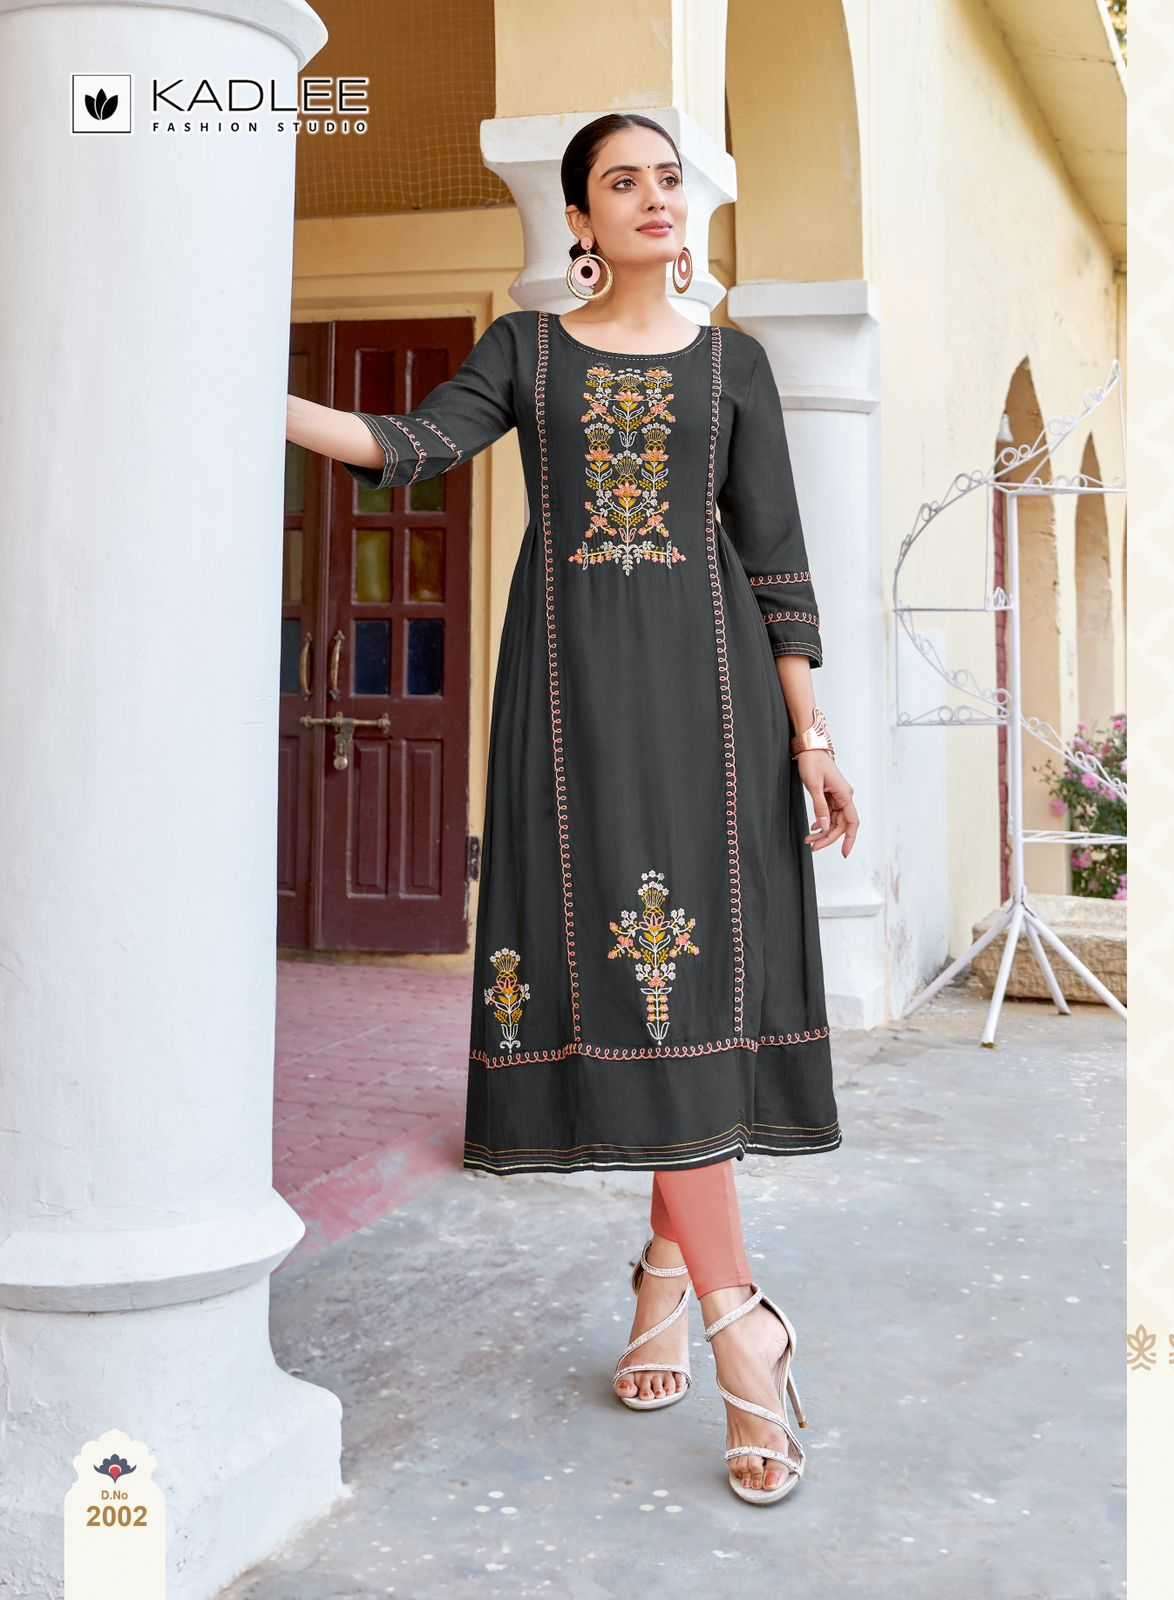 ANSHIKA SERIES 2001 TO 2004 KURTI BY KADLEE DESIGNER EMBROIDERY AND HAND WORK RAYON WEAVING KURTIS ARE AVAILABLE AT WHOLESALE PRICE